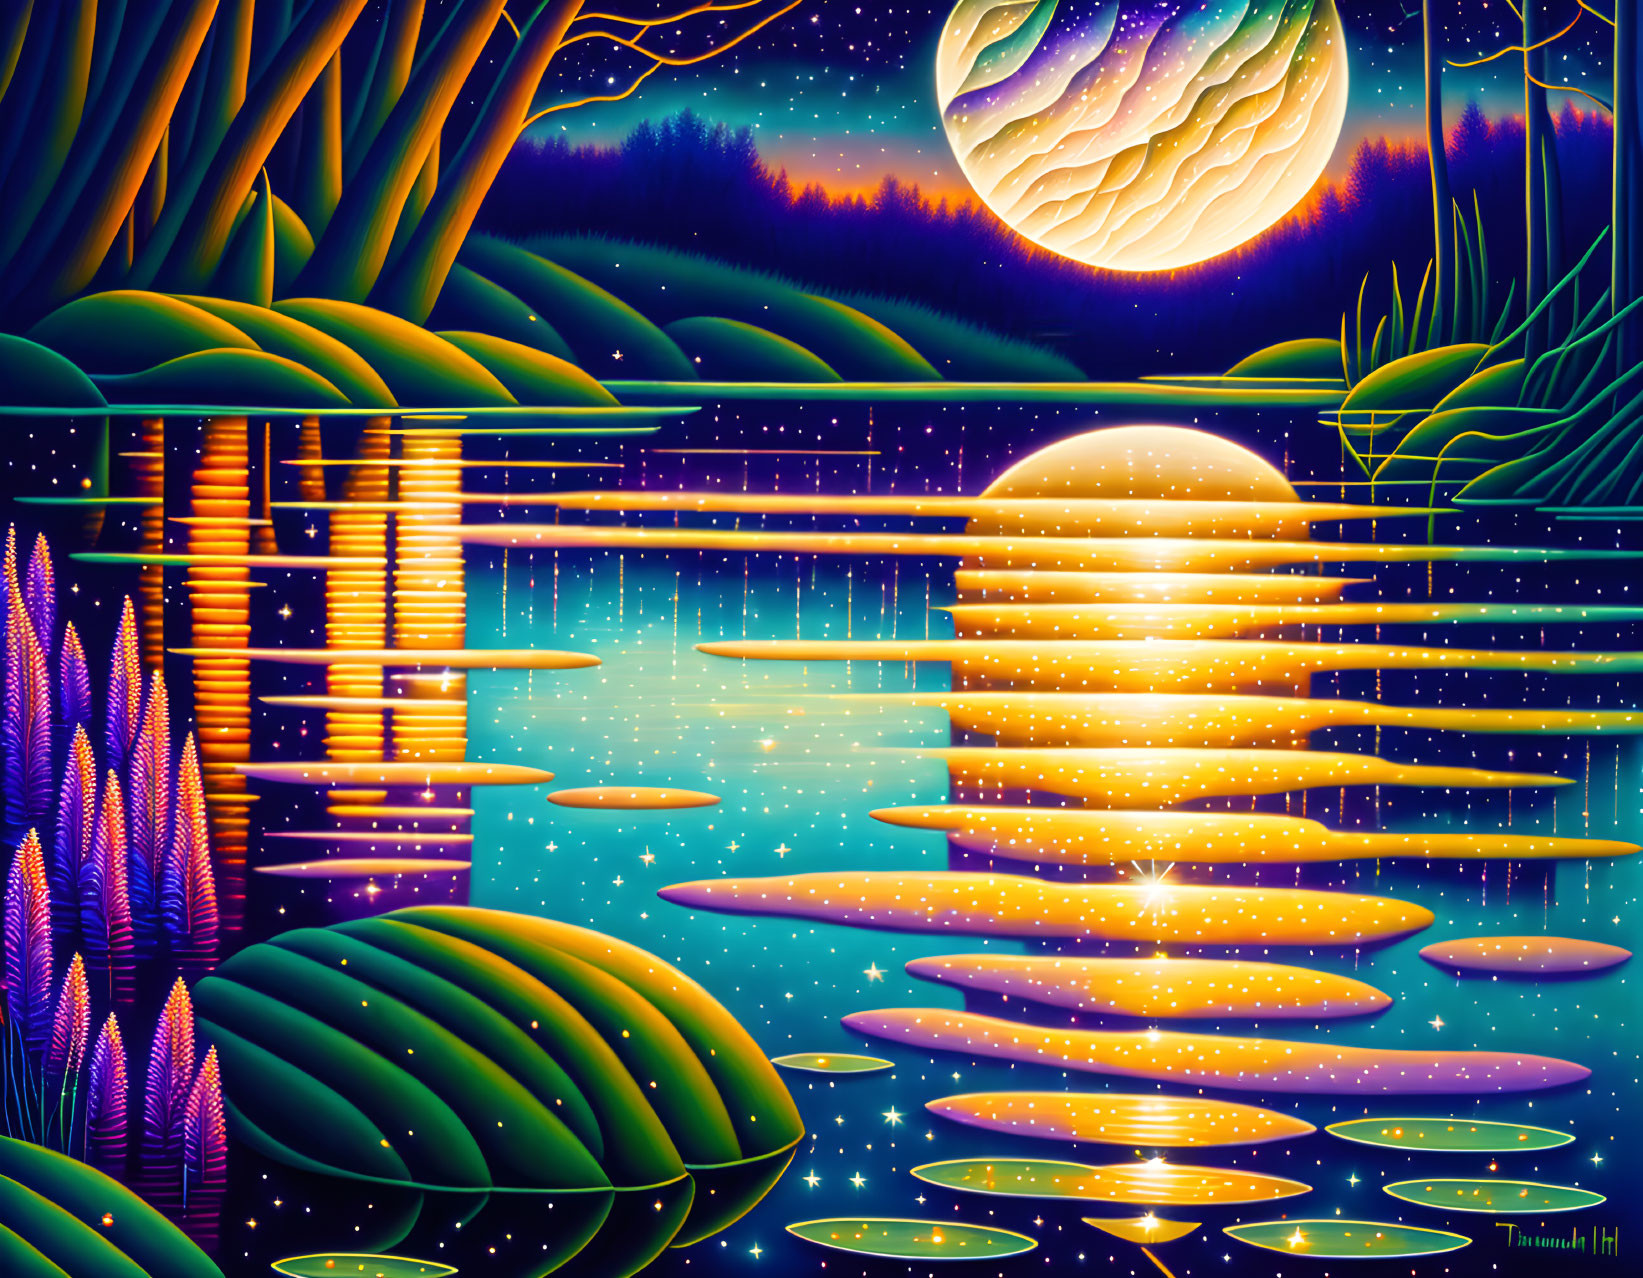 Fantastical nightscape digital art with moon, water, lilypads, and colorful vegetation